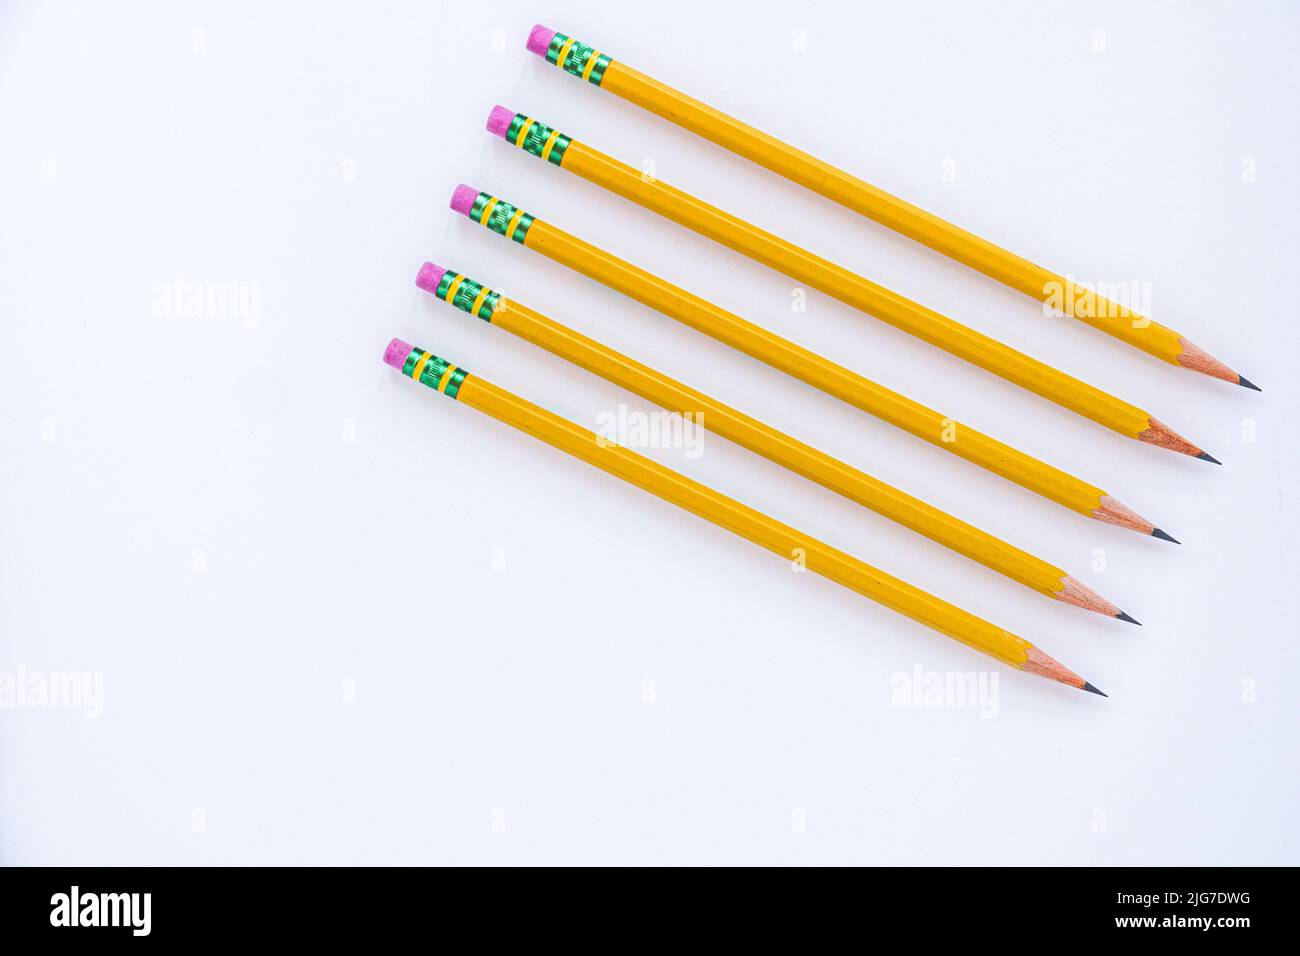 Negative space is utilized with five sharp pencils lined up on a white sheet of paper at an angle. Stock Photo